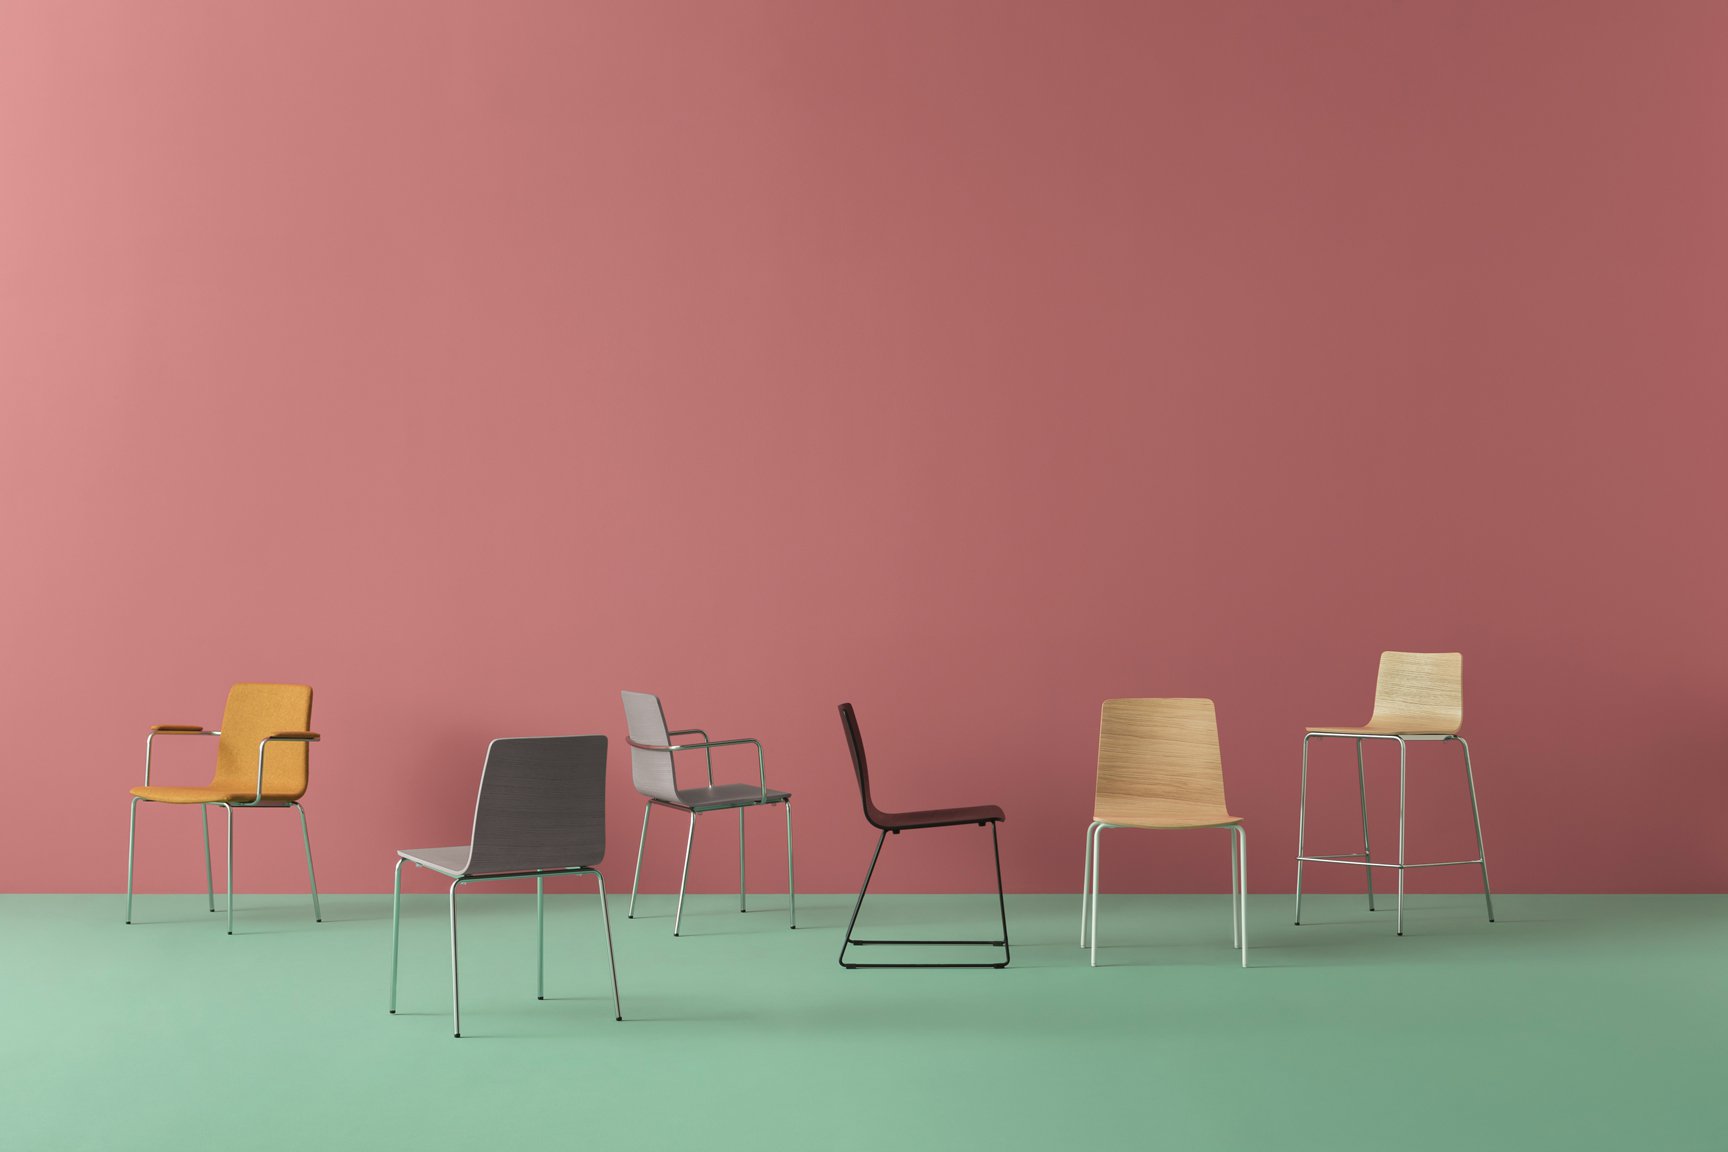 Inga 5613 chair from Pedrali, designed by Pedrali R&D